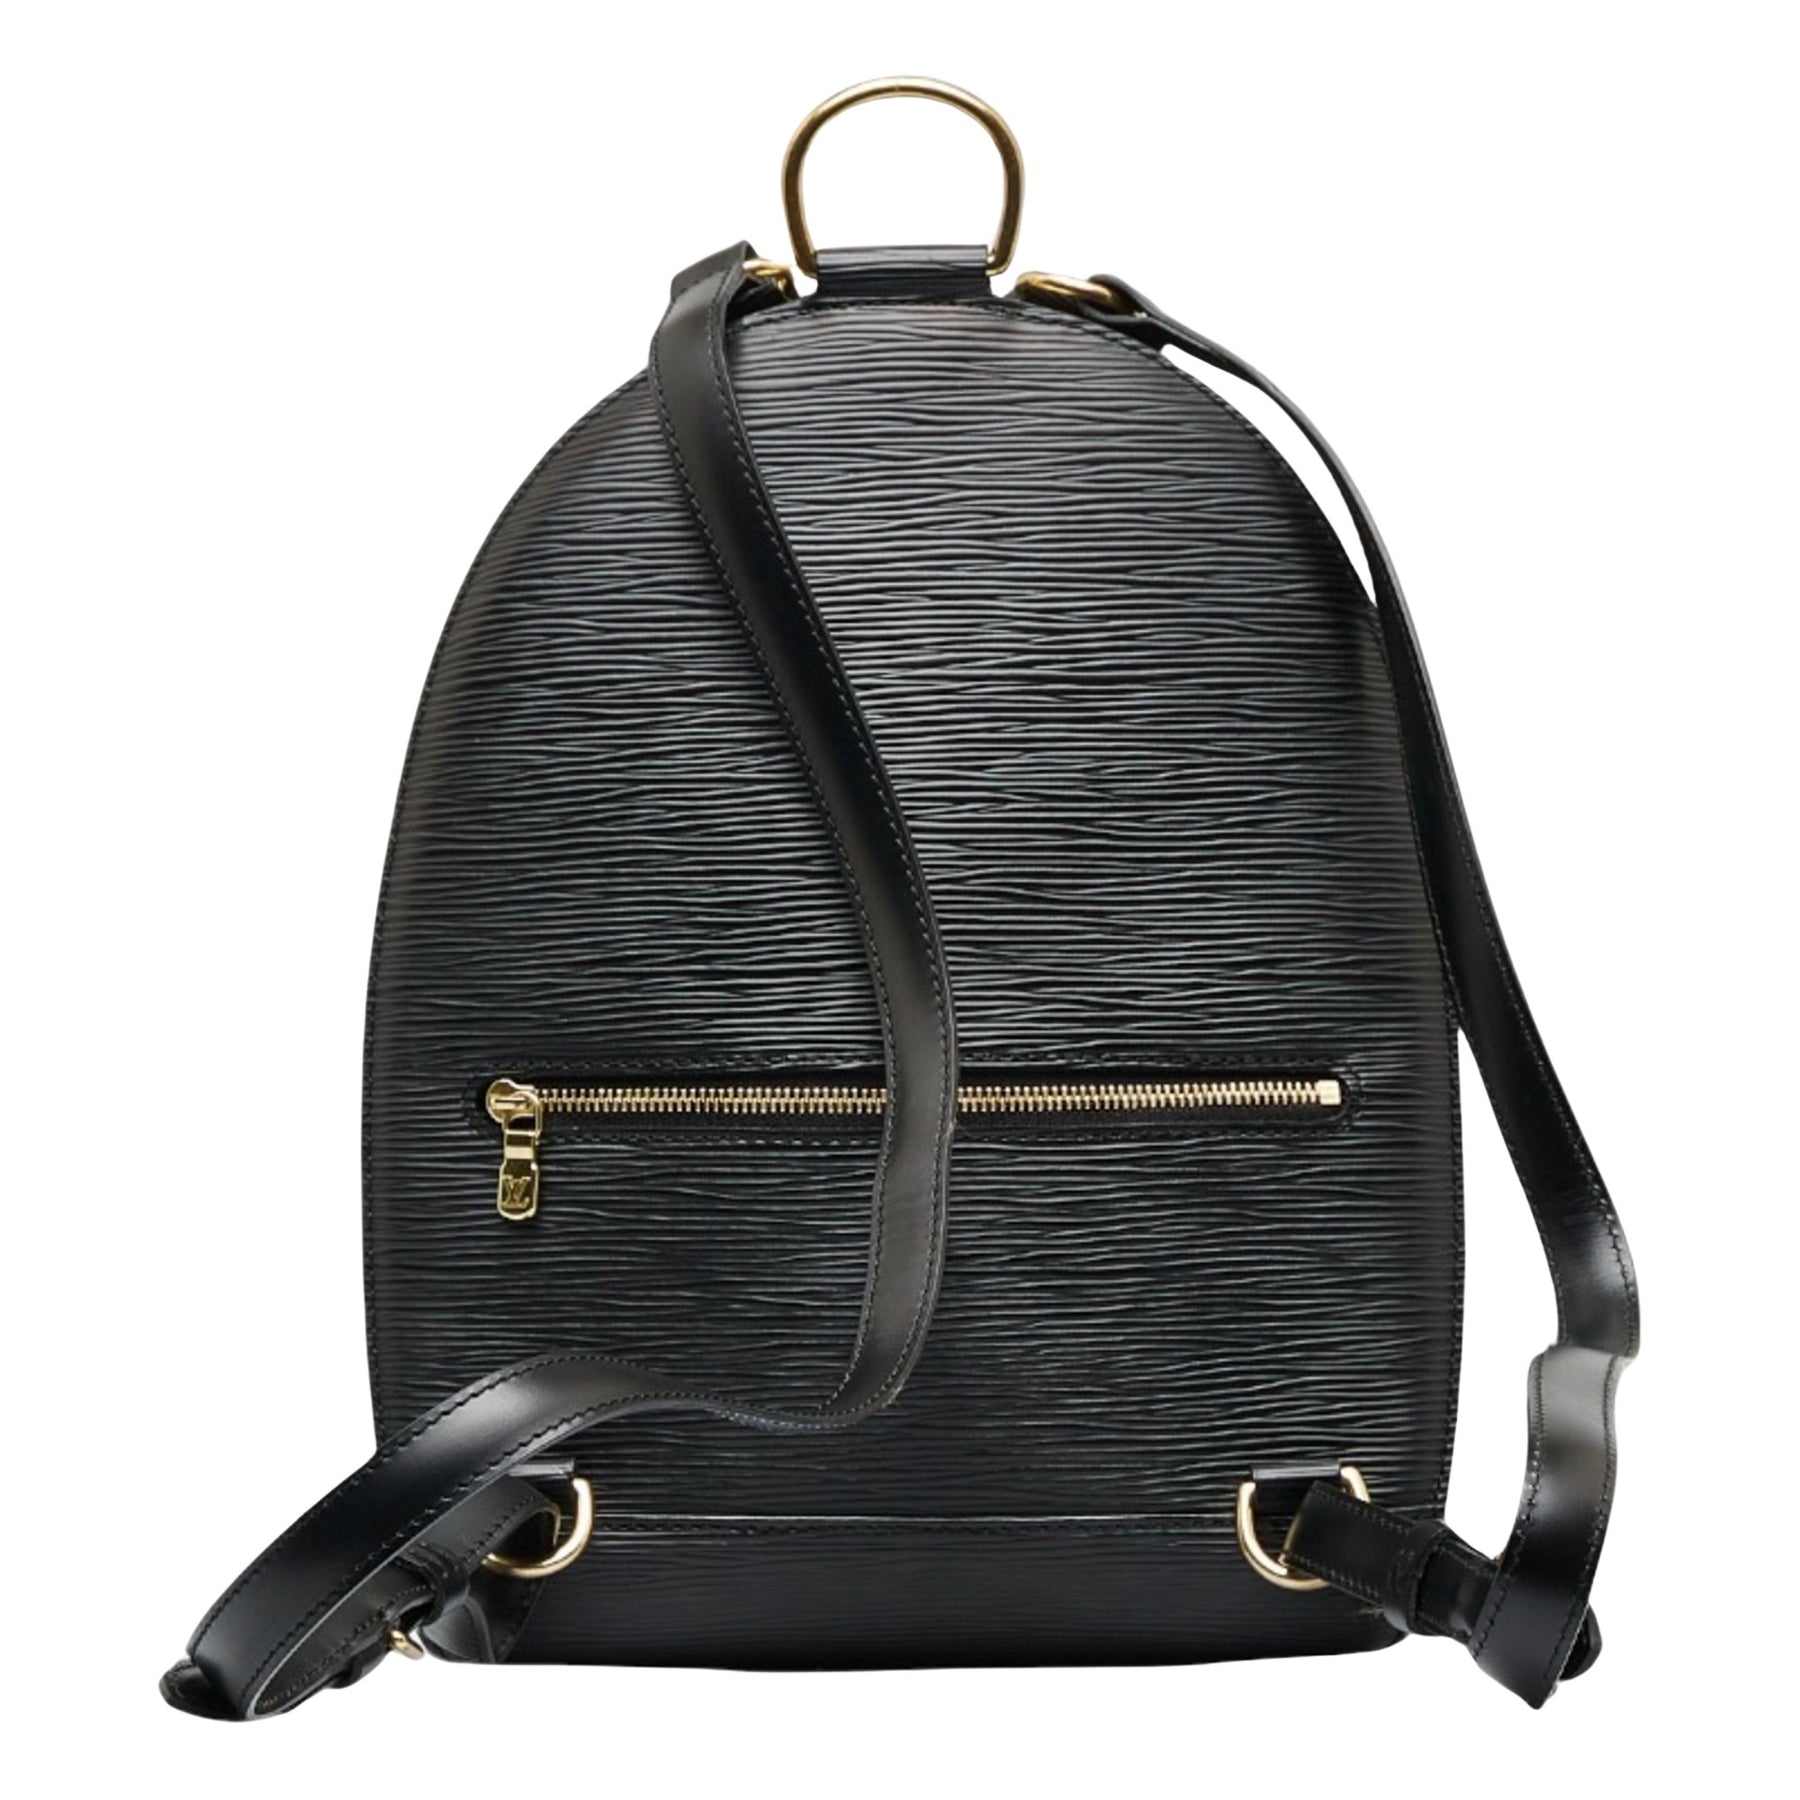 Louis Vuitton Sorbonne Black Leather Backpack Bag (Pre-Owned)